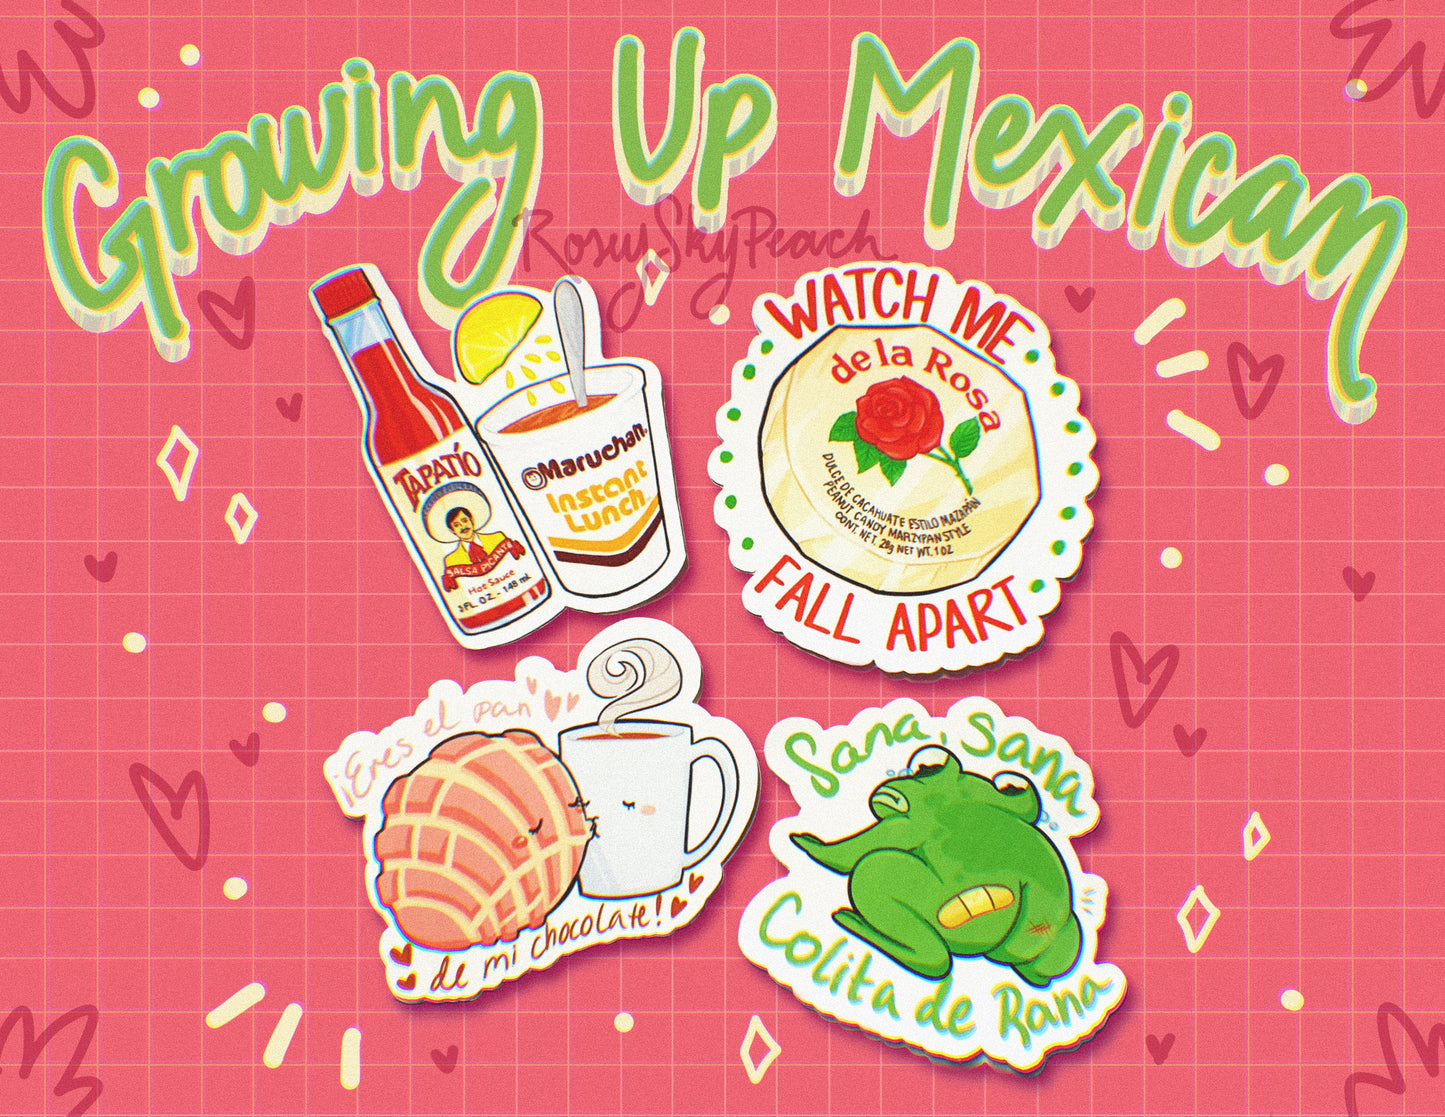 Growing Up Mexican stickers